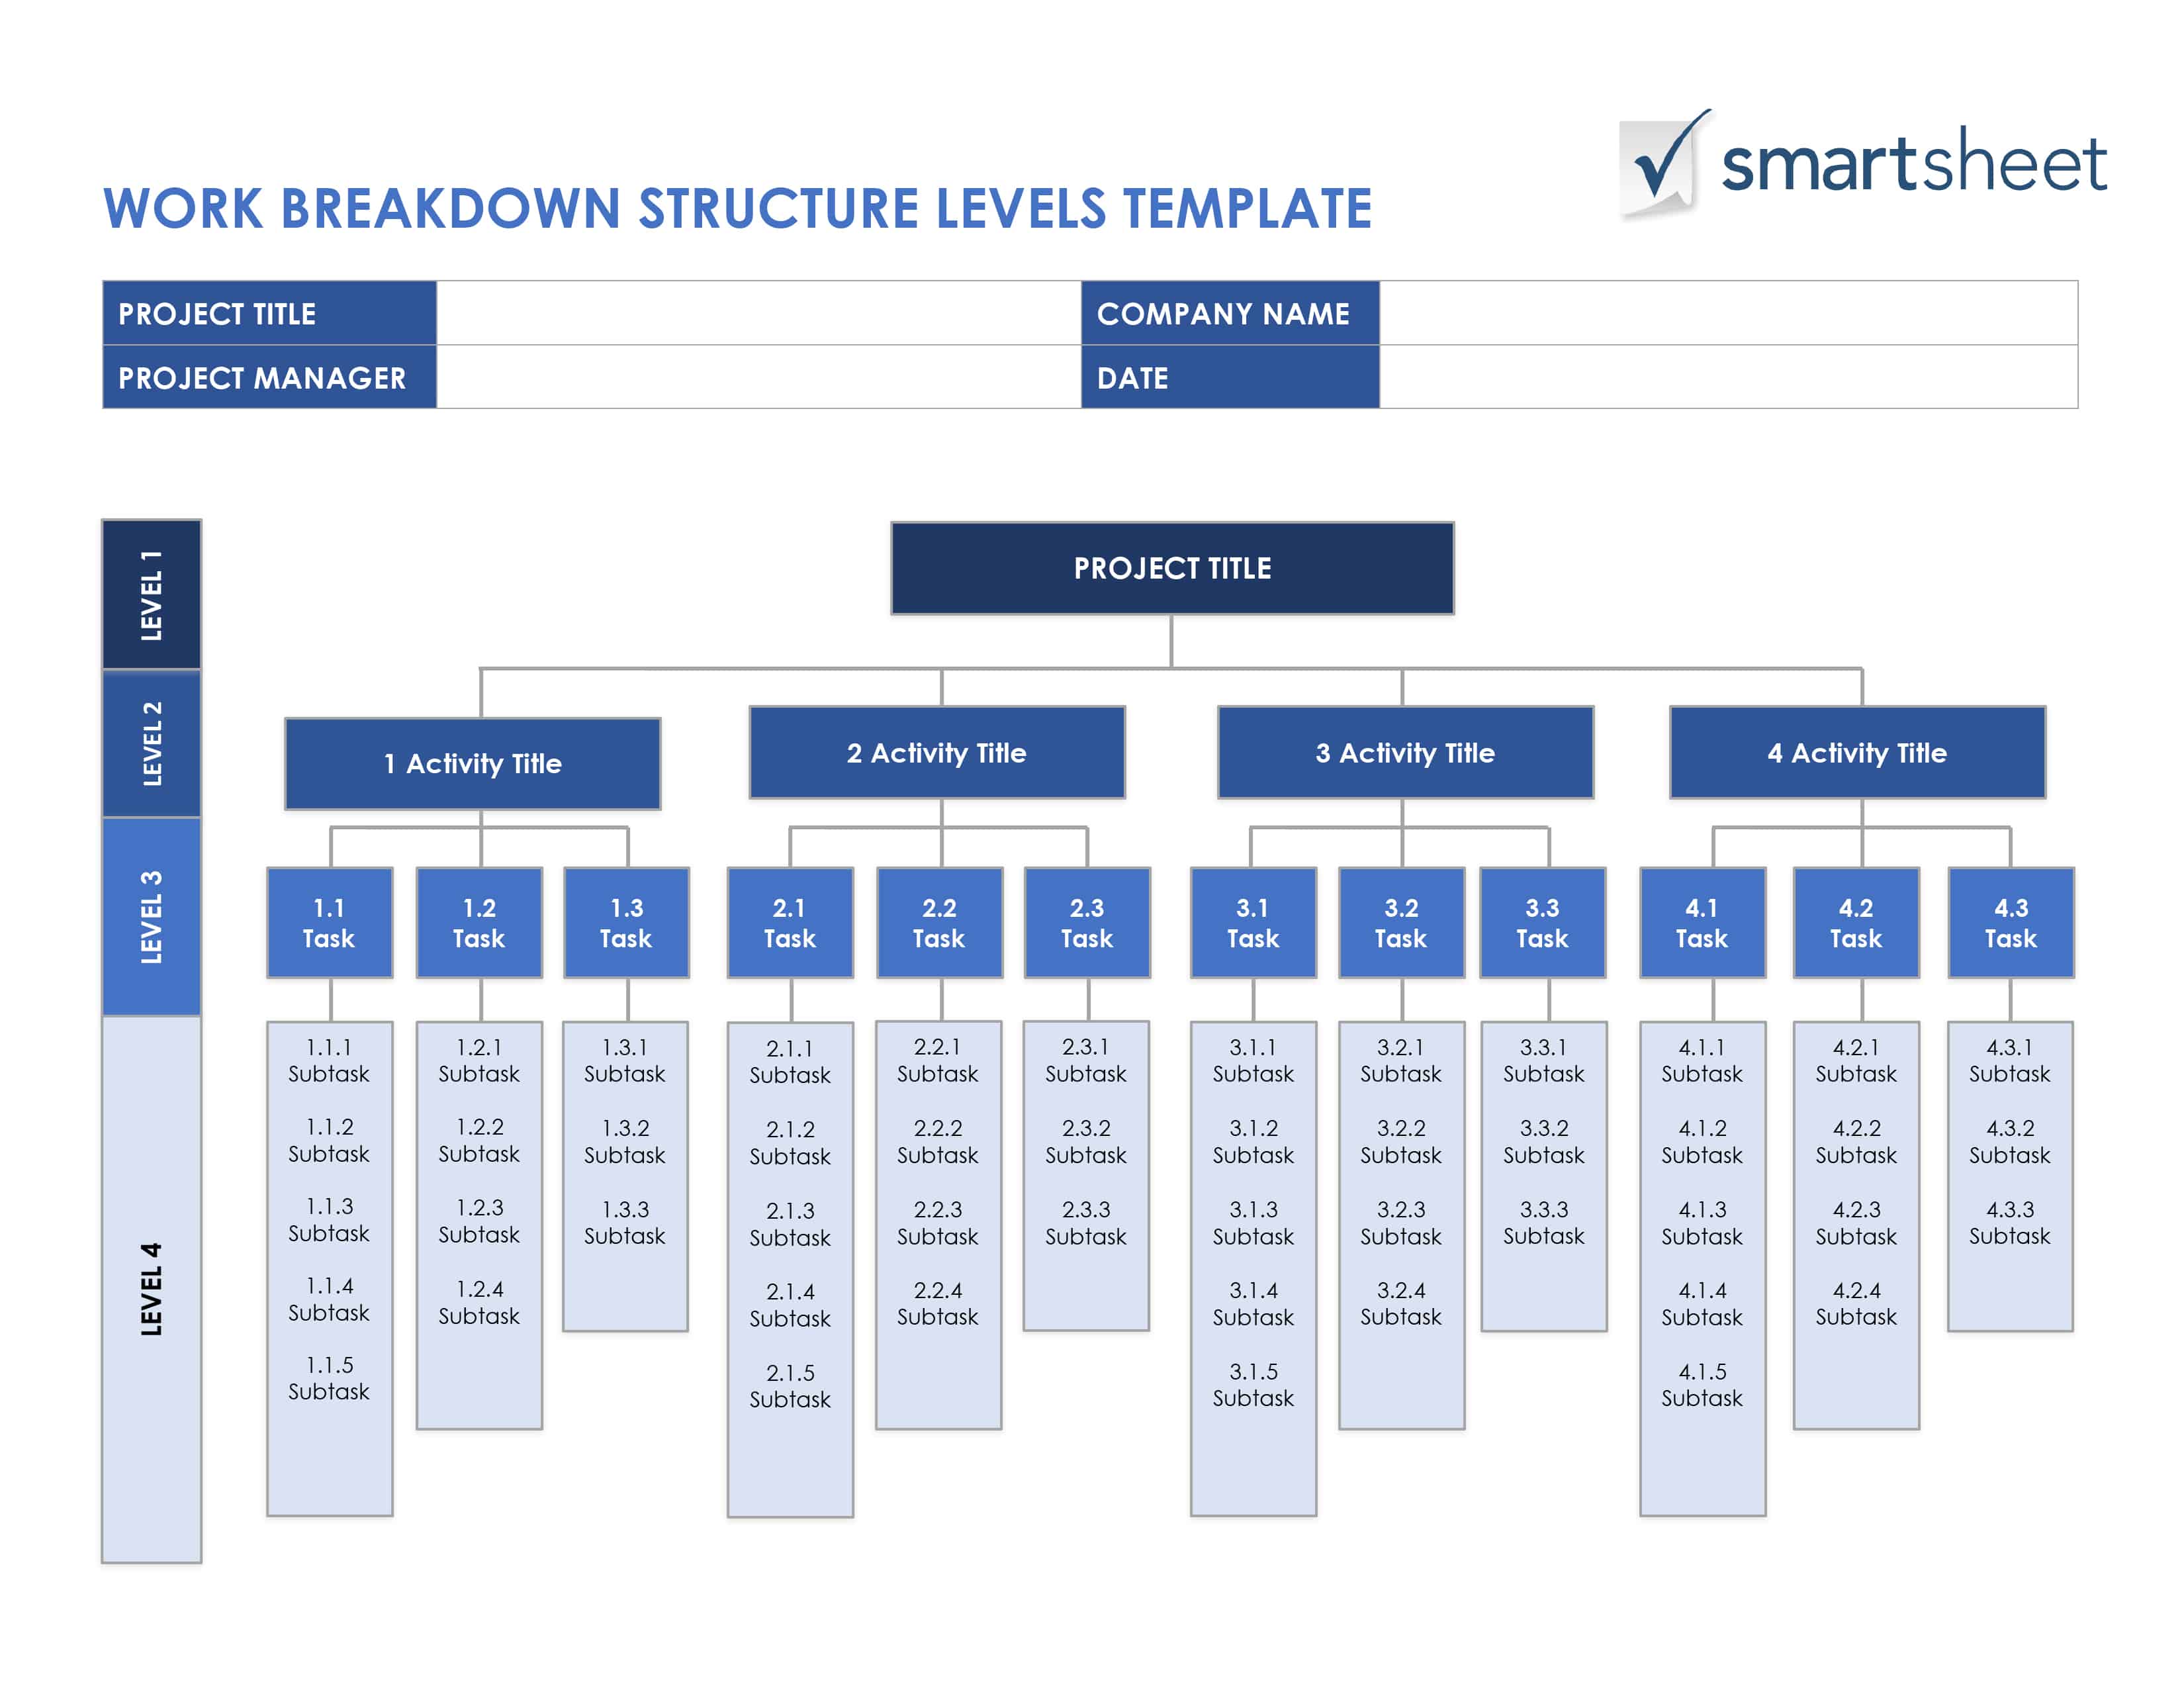 Project Work Breakdown Structure Sample Image to u